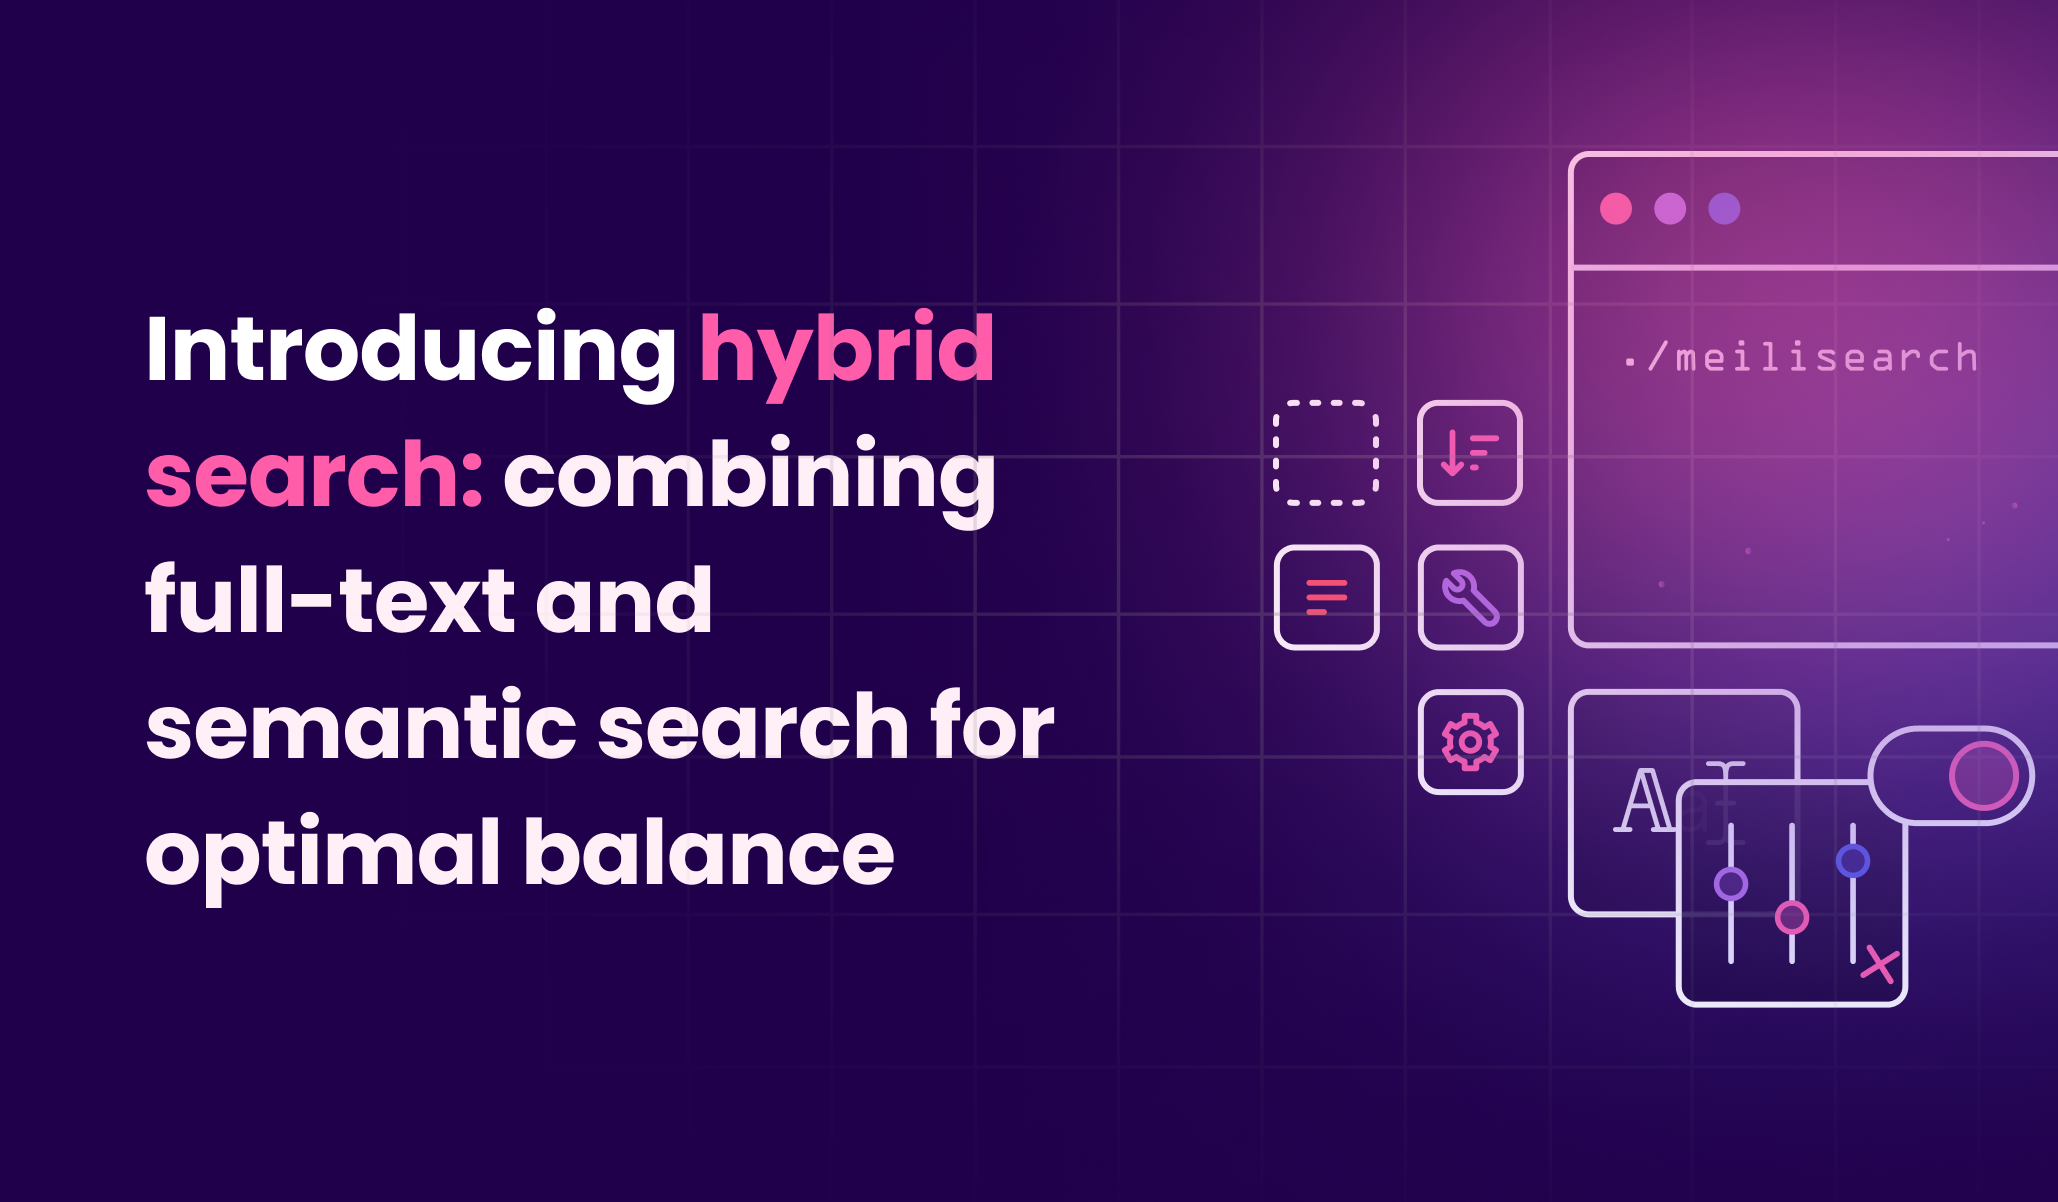 Introducing hybrid search: combining full-text and semantic search for optimal balance